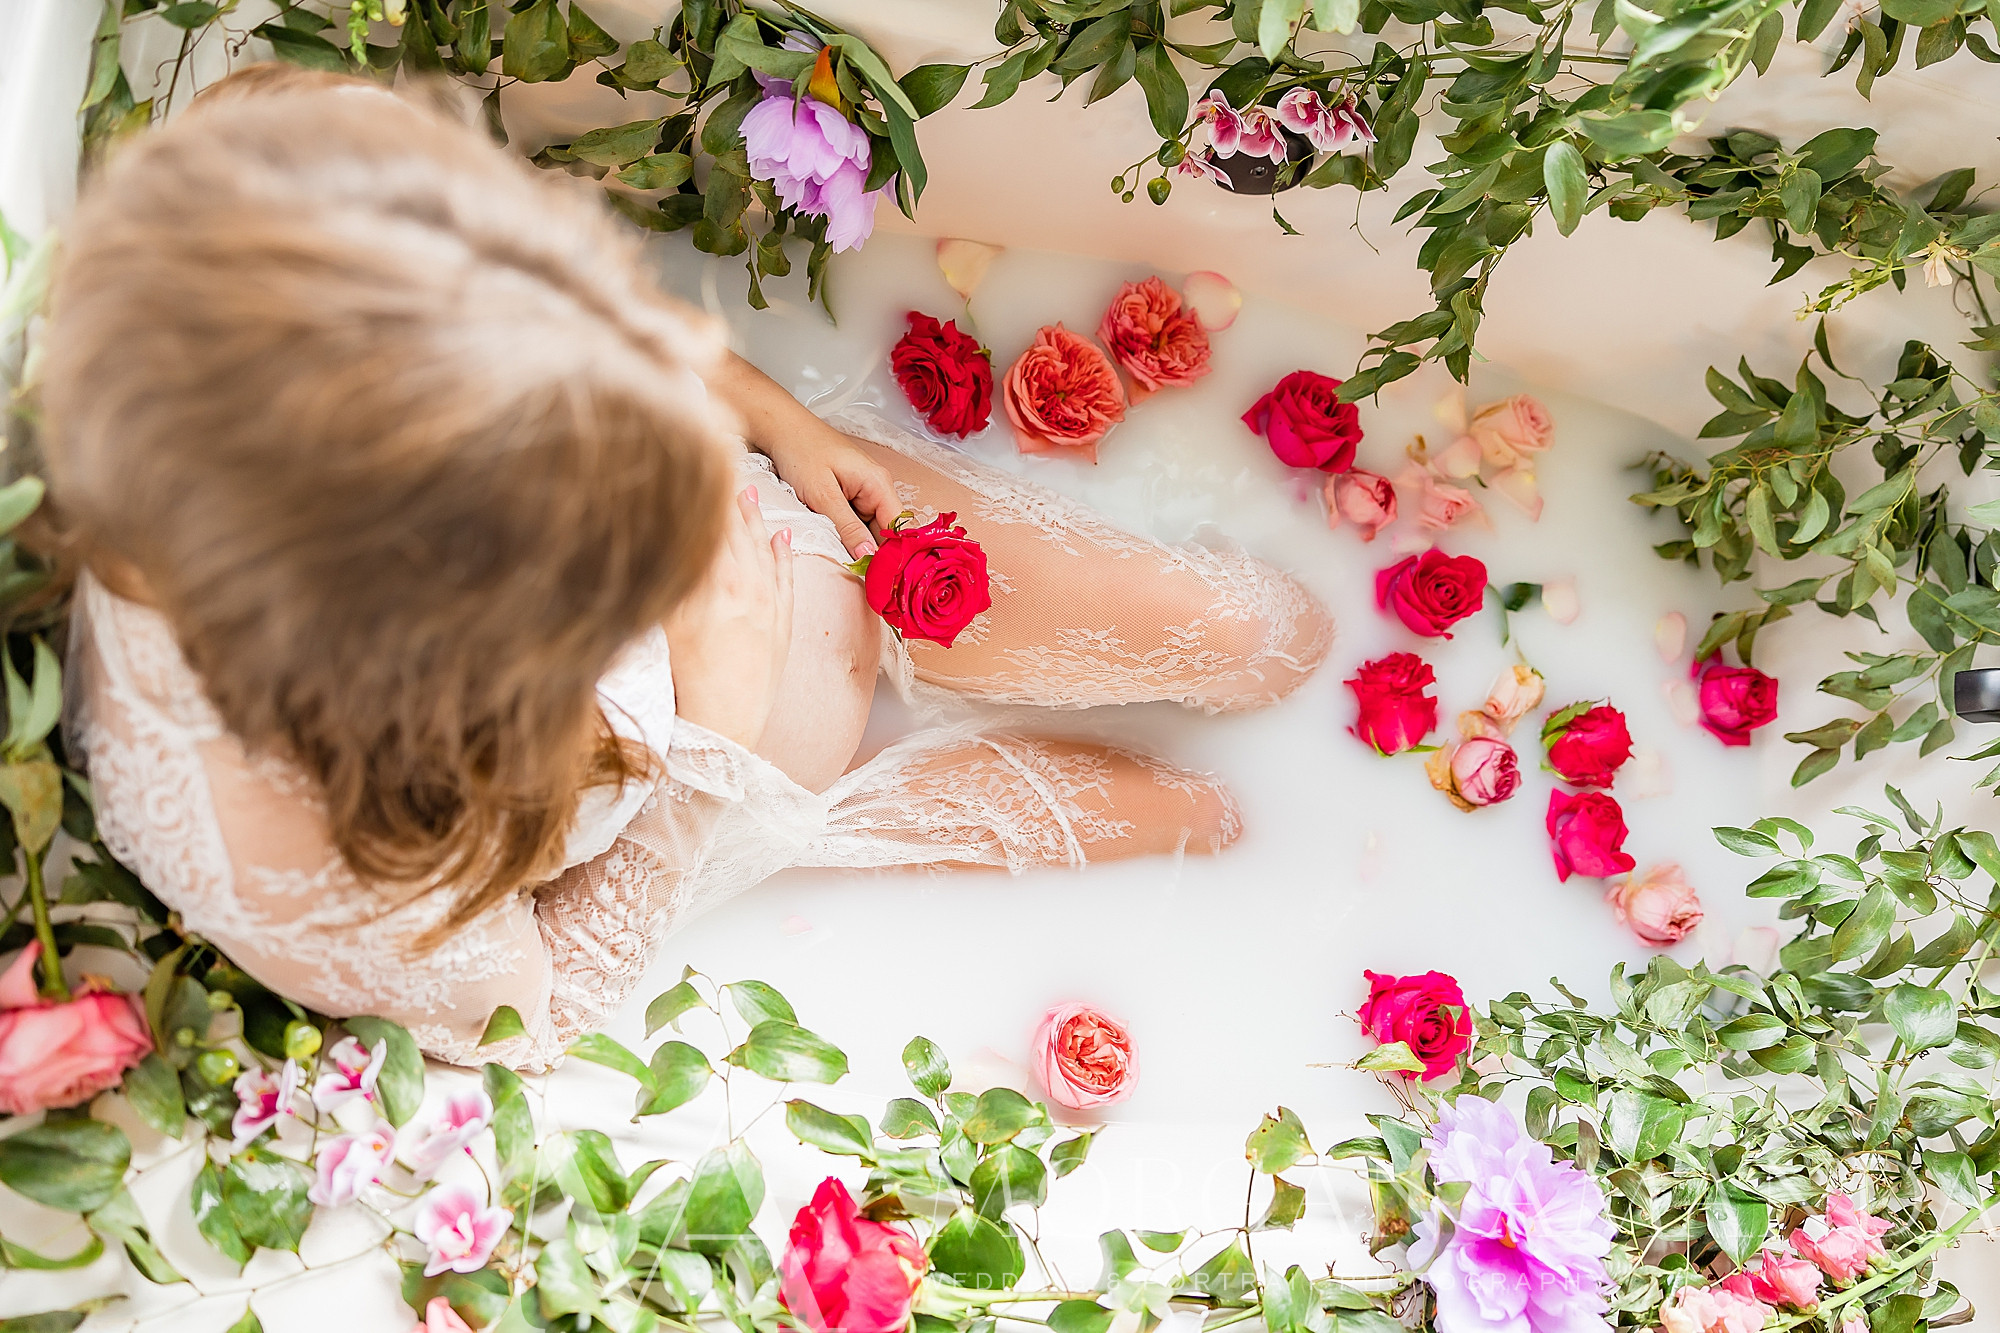 woman lays in tub with flowers and milk during maternity photos